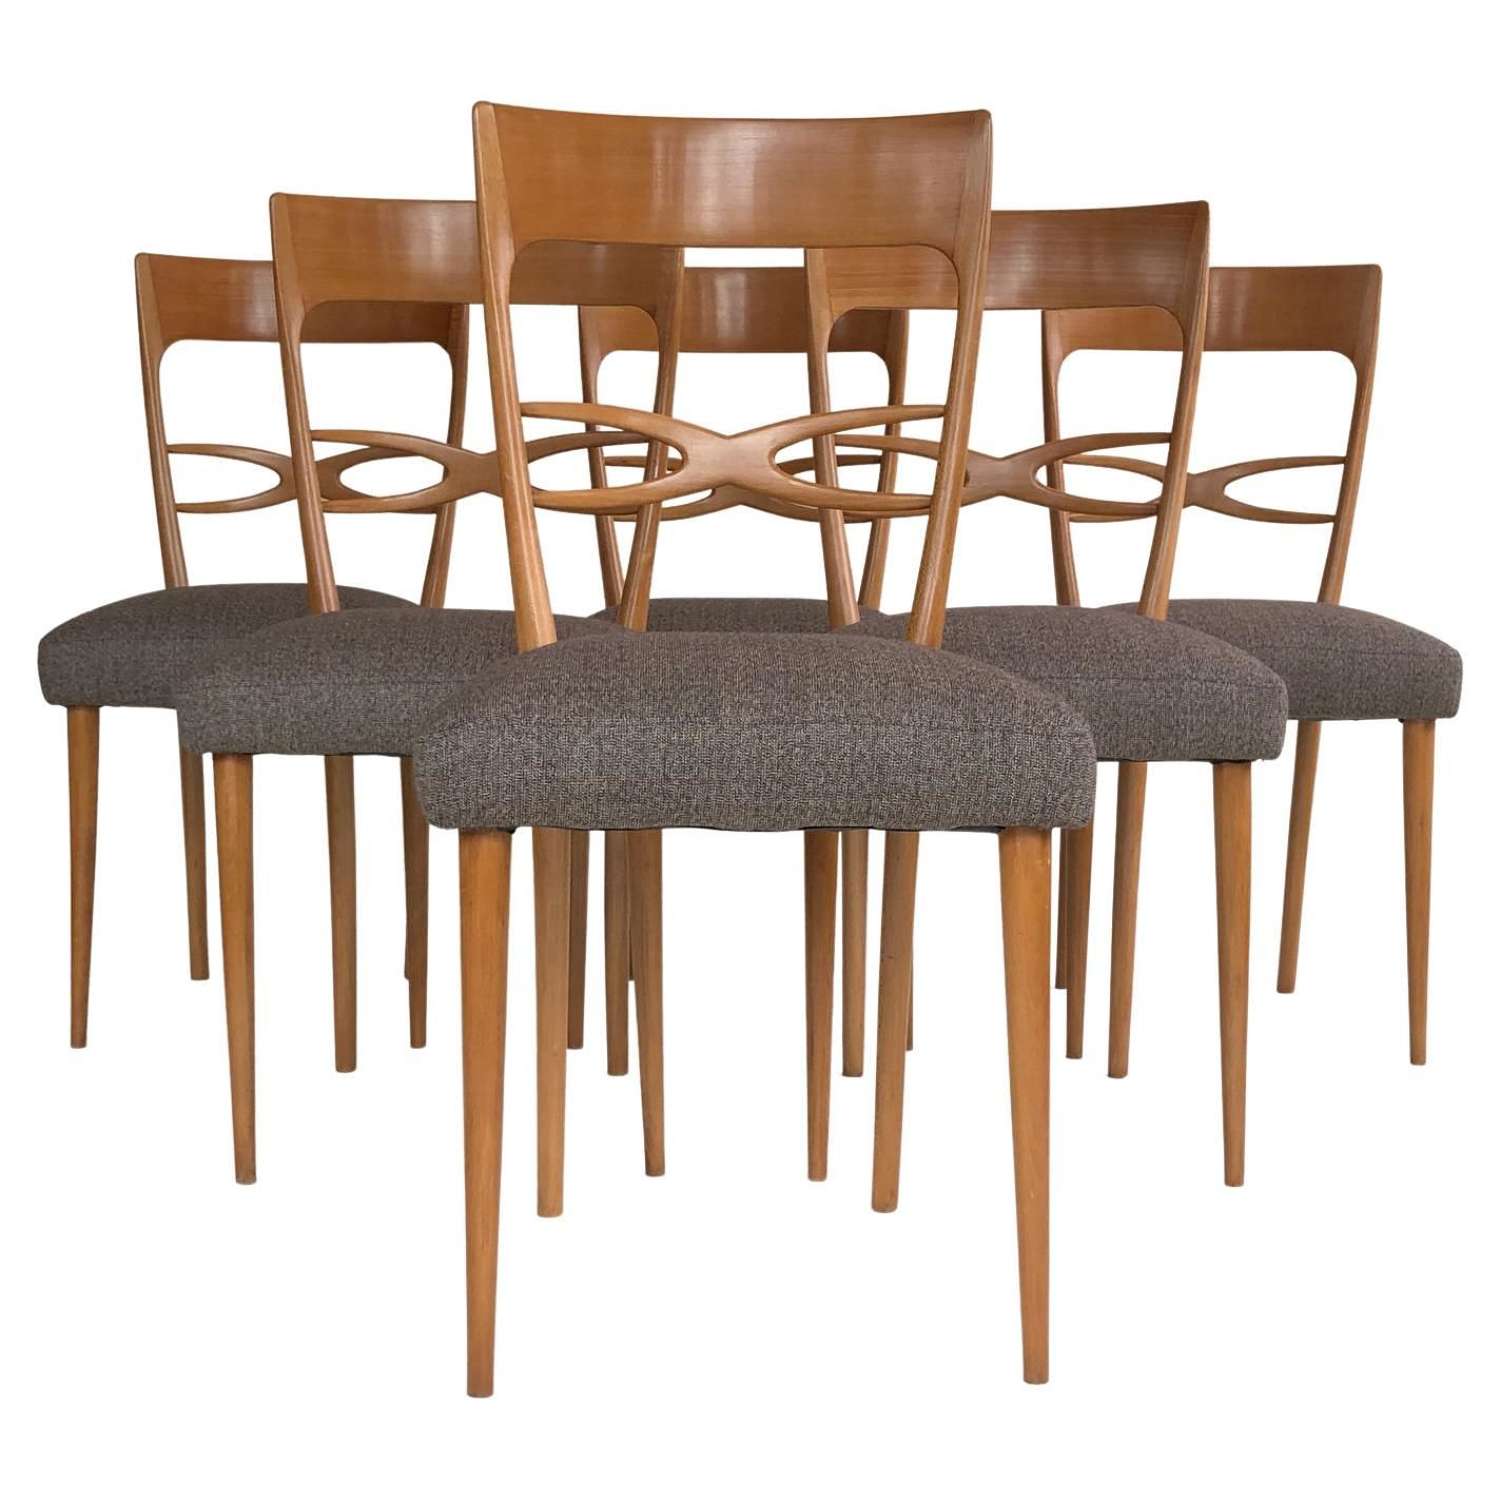 Set of 6 Midcentury Italian Dining Chairs, Early 1950s, Blond Wood